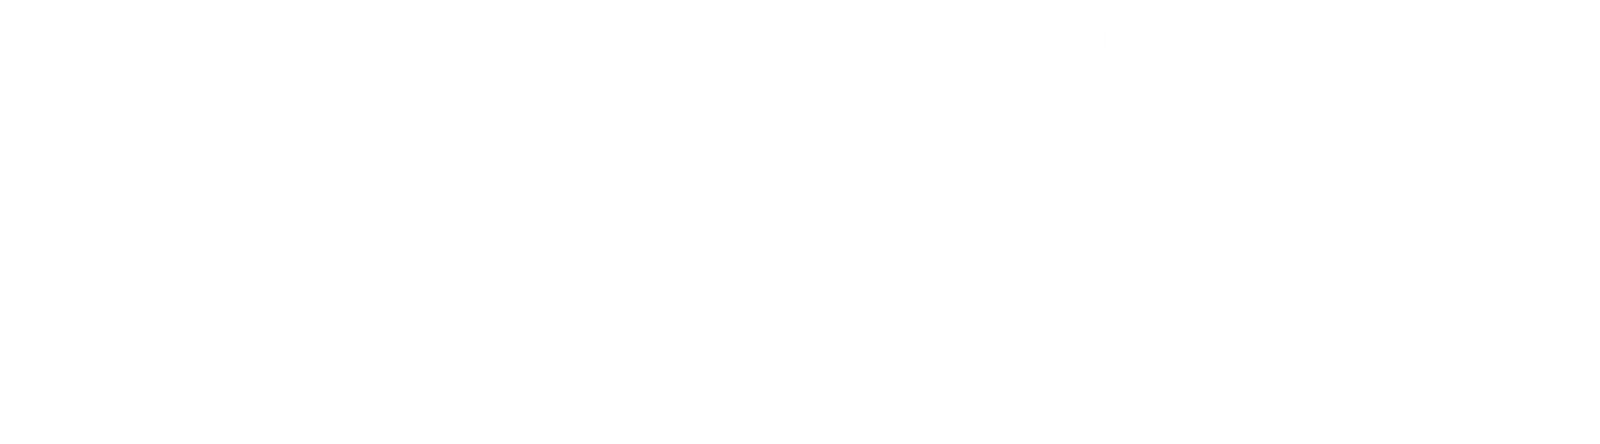 North Jersey Partners brokered by eXp Realty Logo www.northjerseypartners.com